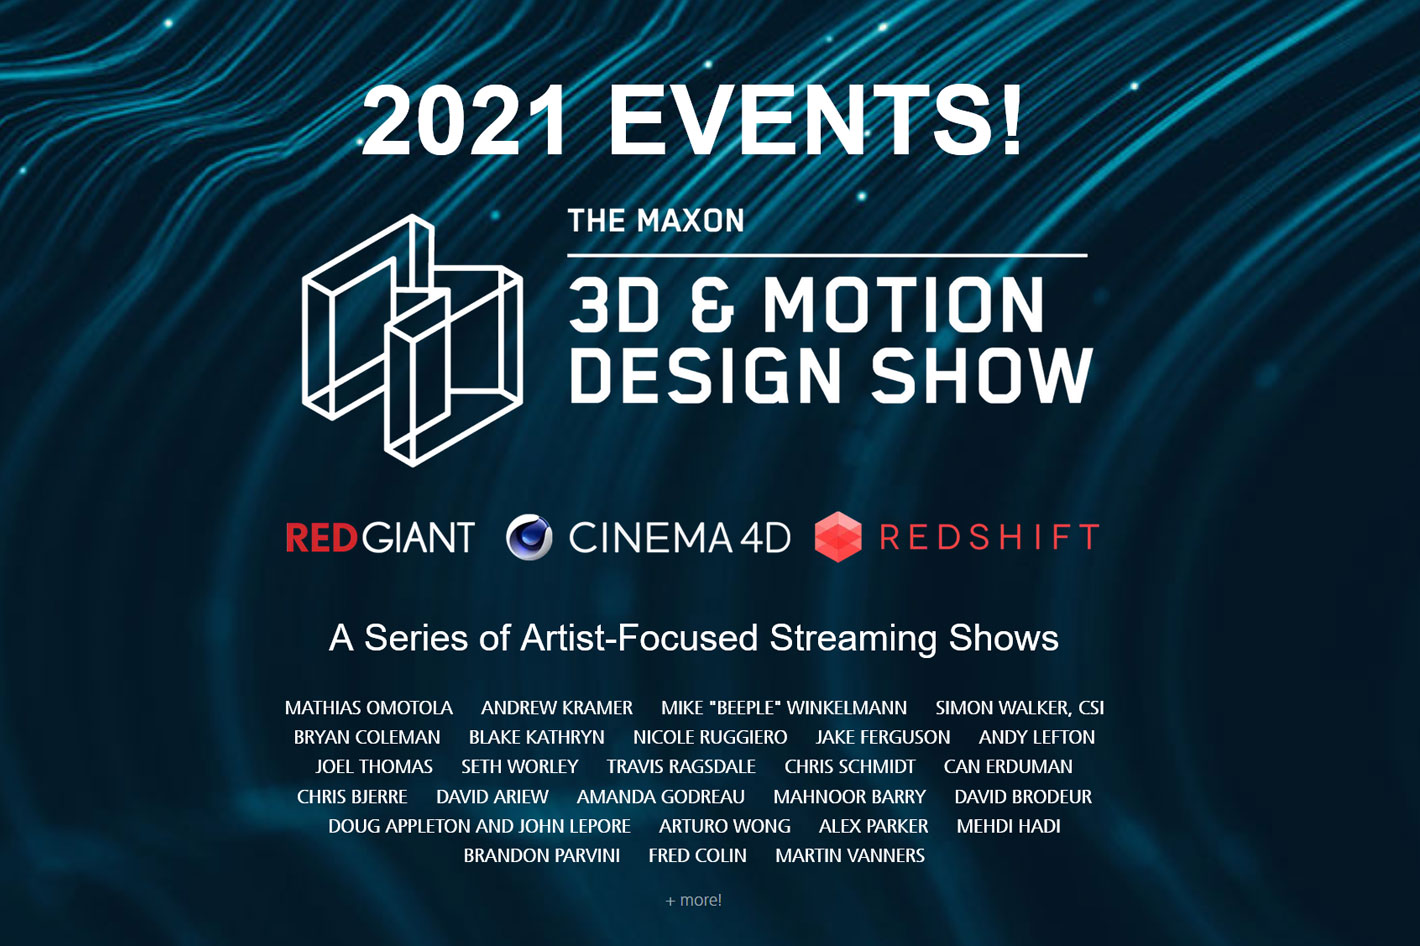 Maxon: May 3D & Motion Design Show coming soon